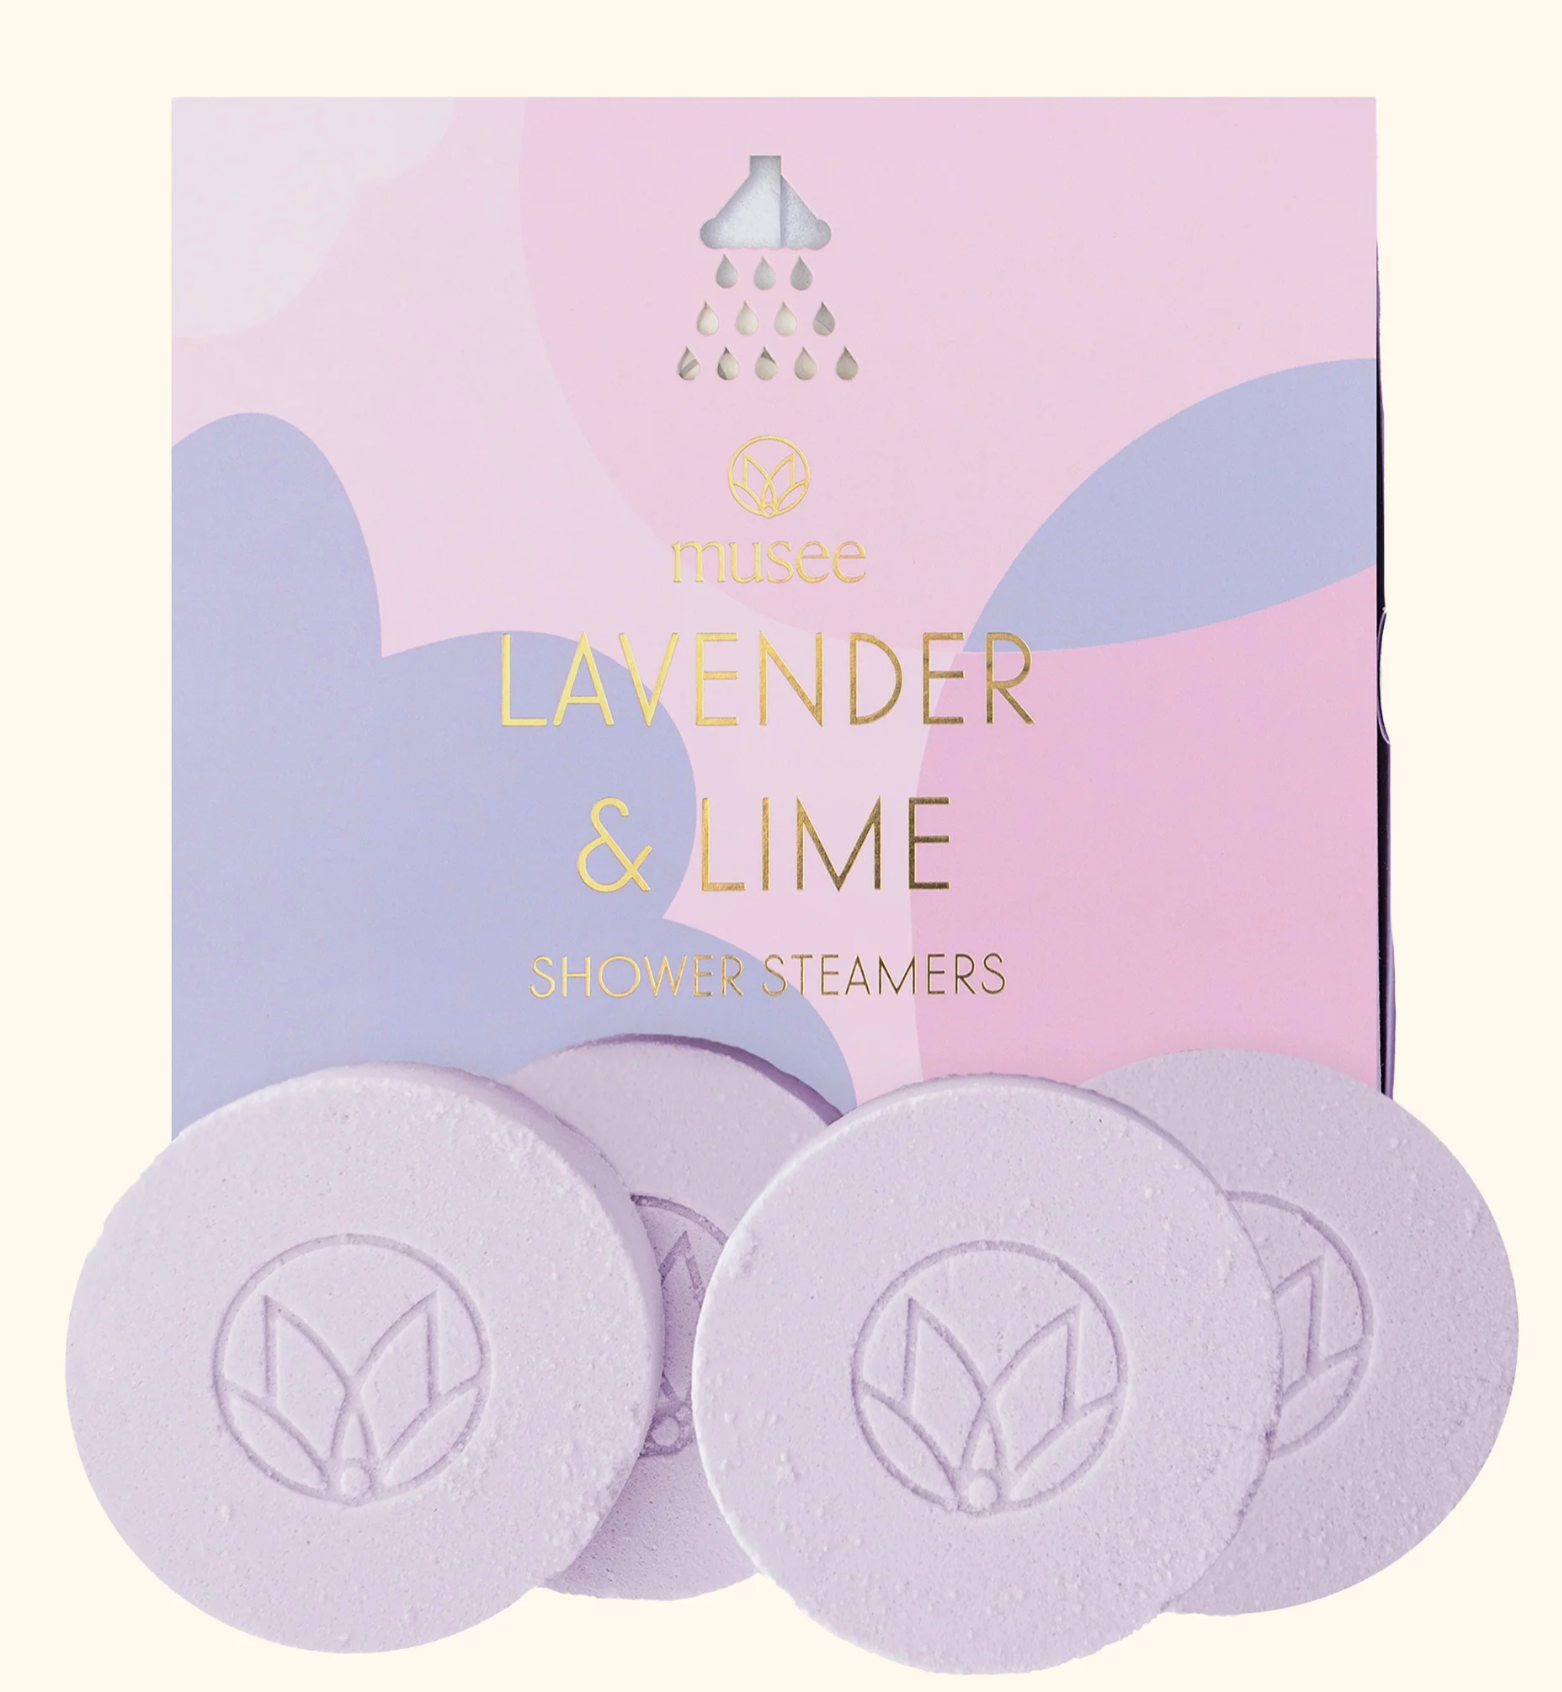 Lavender & Lime Shower Steamers - The French Shoppe